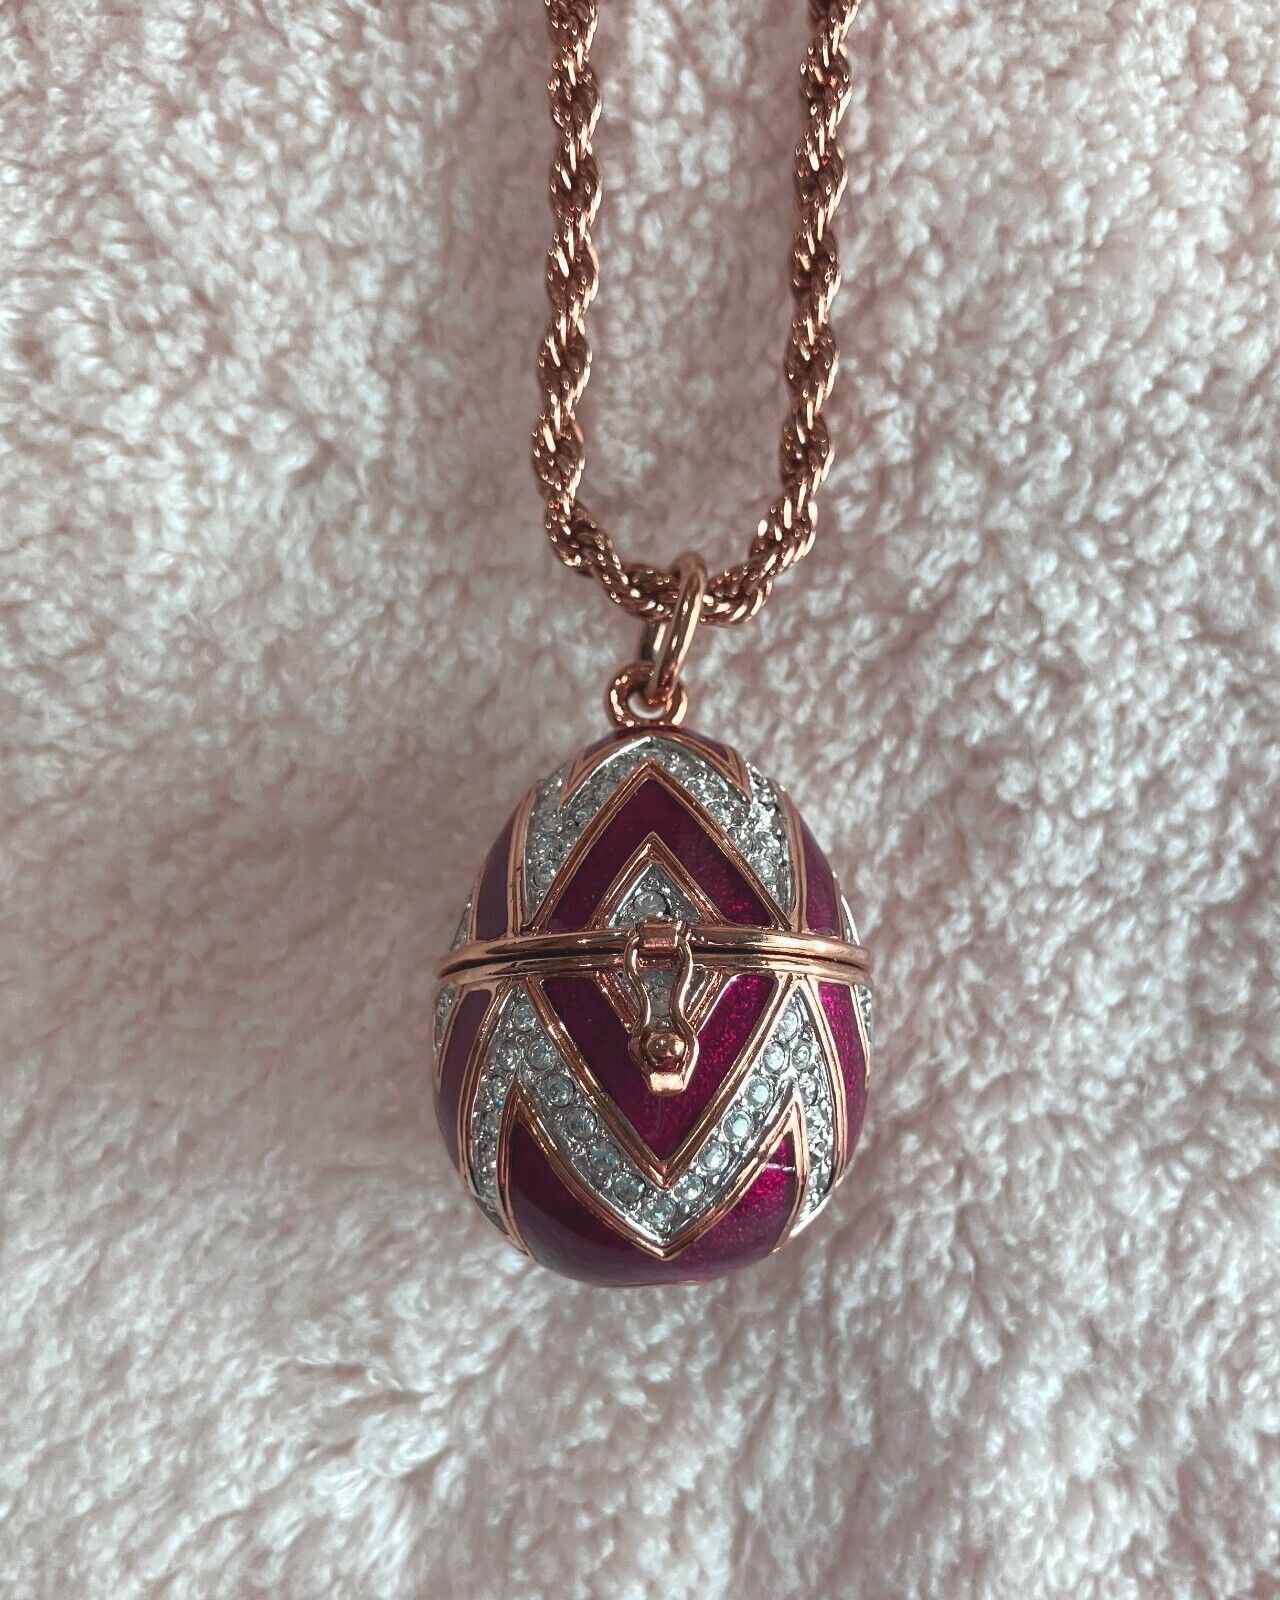 ENAMELED RUSSIAN EGG PENDANT - HINGED TO OPEN